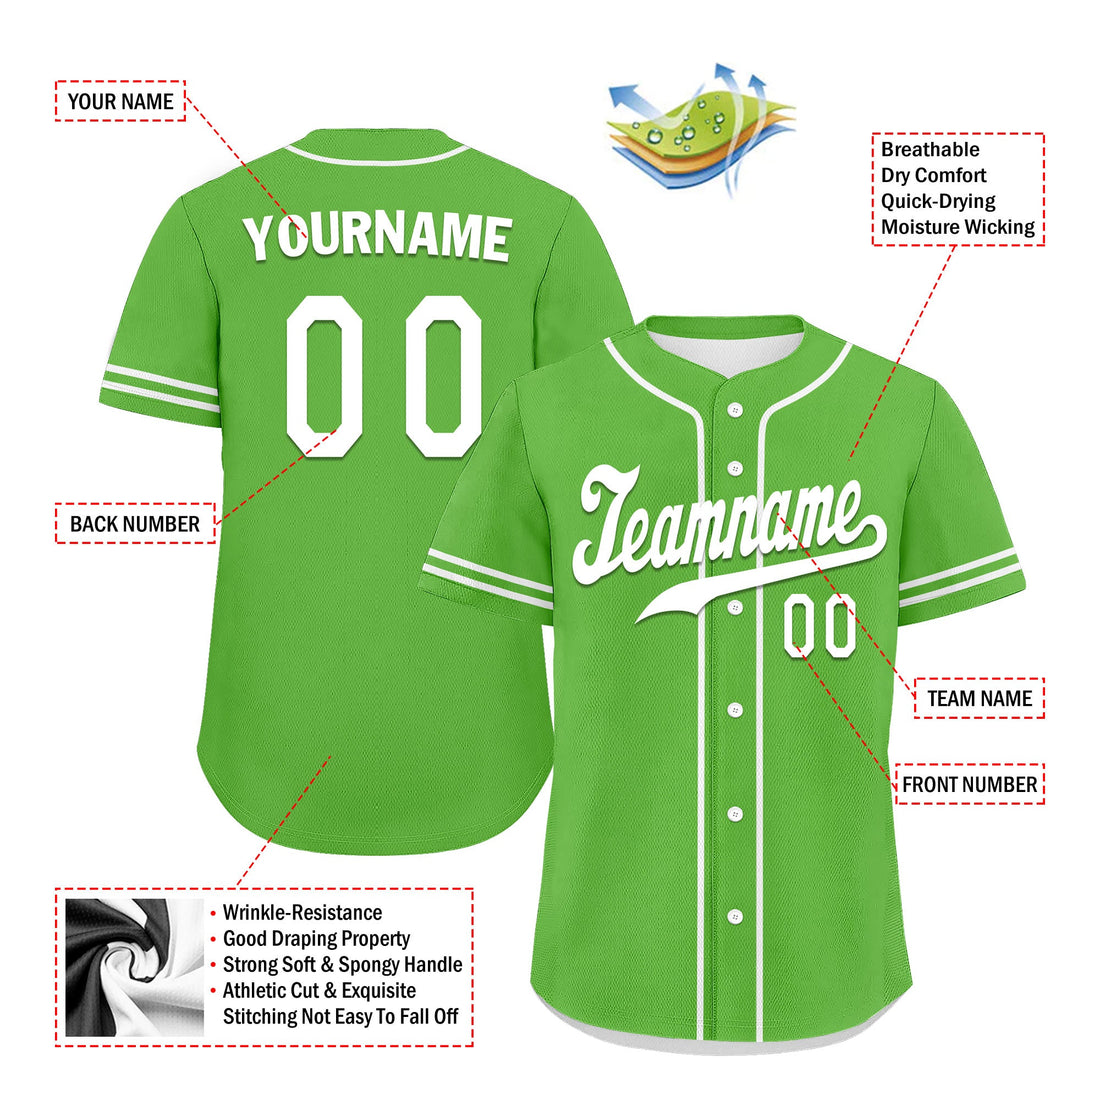 Custom Green Classic Style White Personalized Authentic Baseball Jersey UN002-bd0b00d8-be